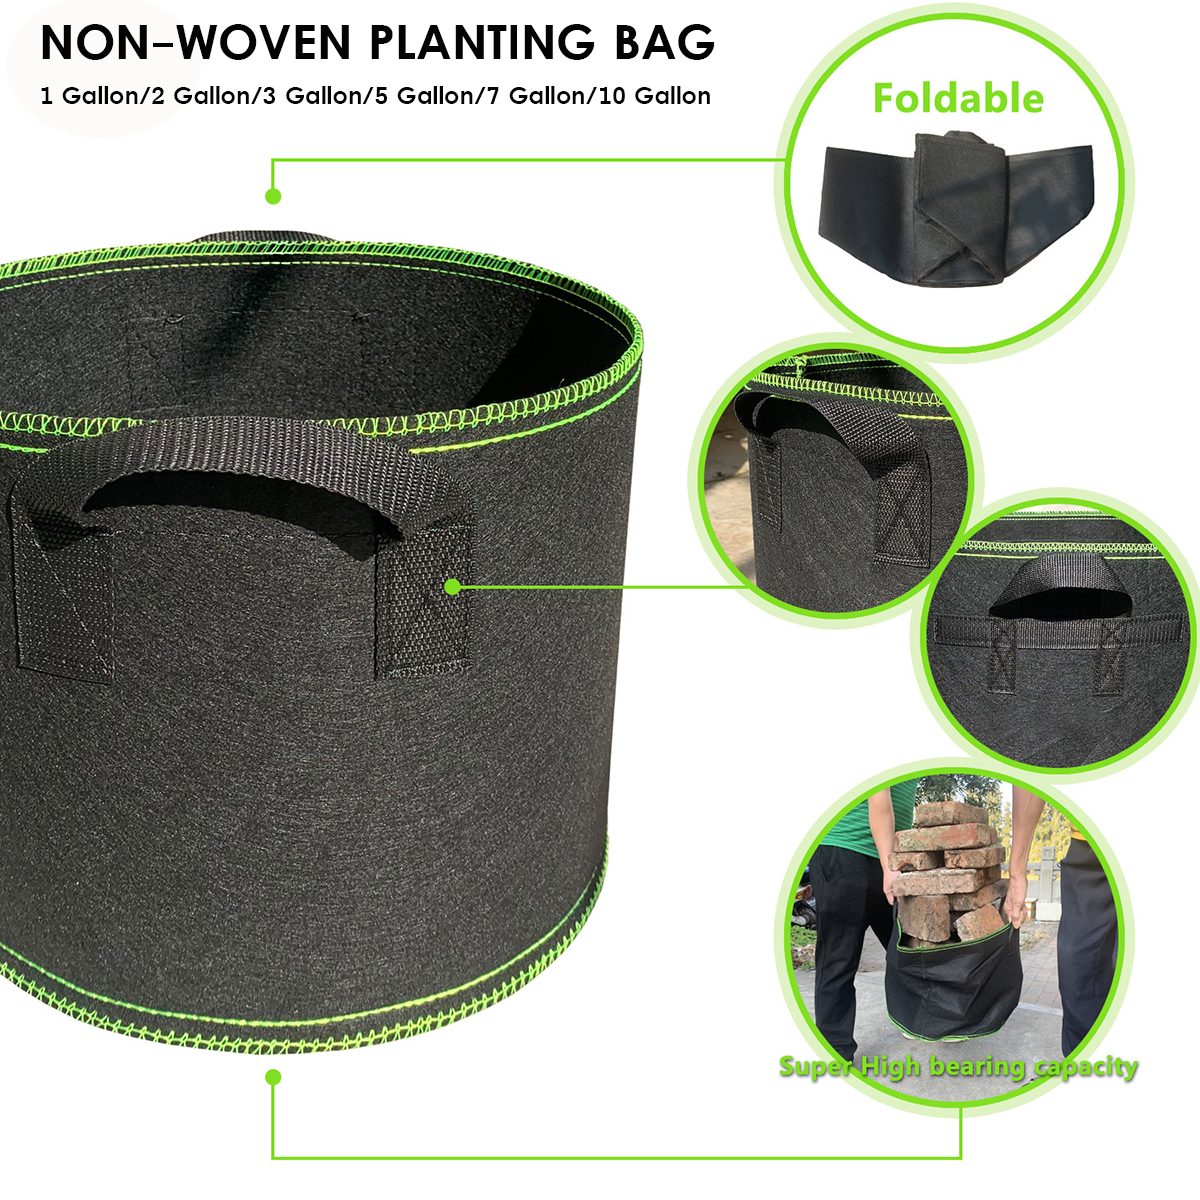 Plant-Growing-Bag-Aeration-Non-woven-Fabric-Pots-Container-Grow-Bag-1702877-2